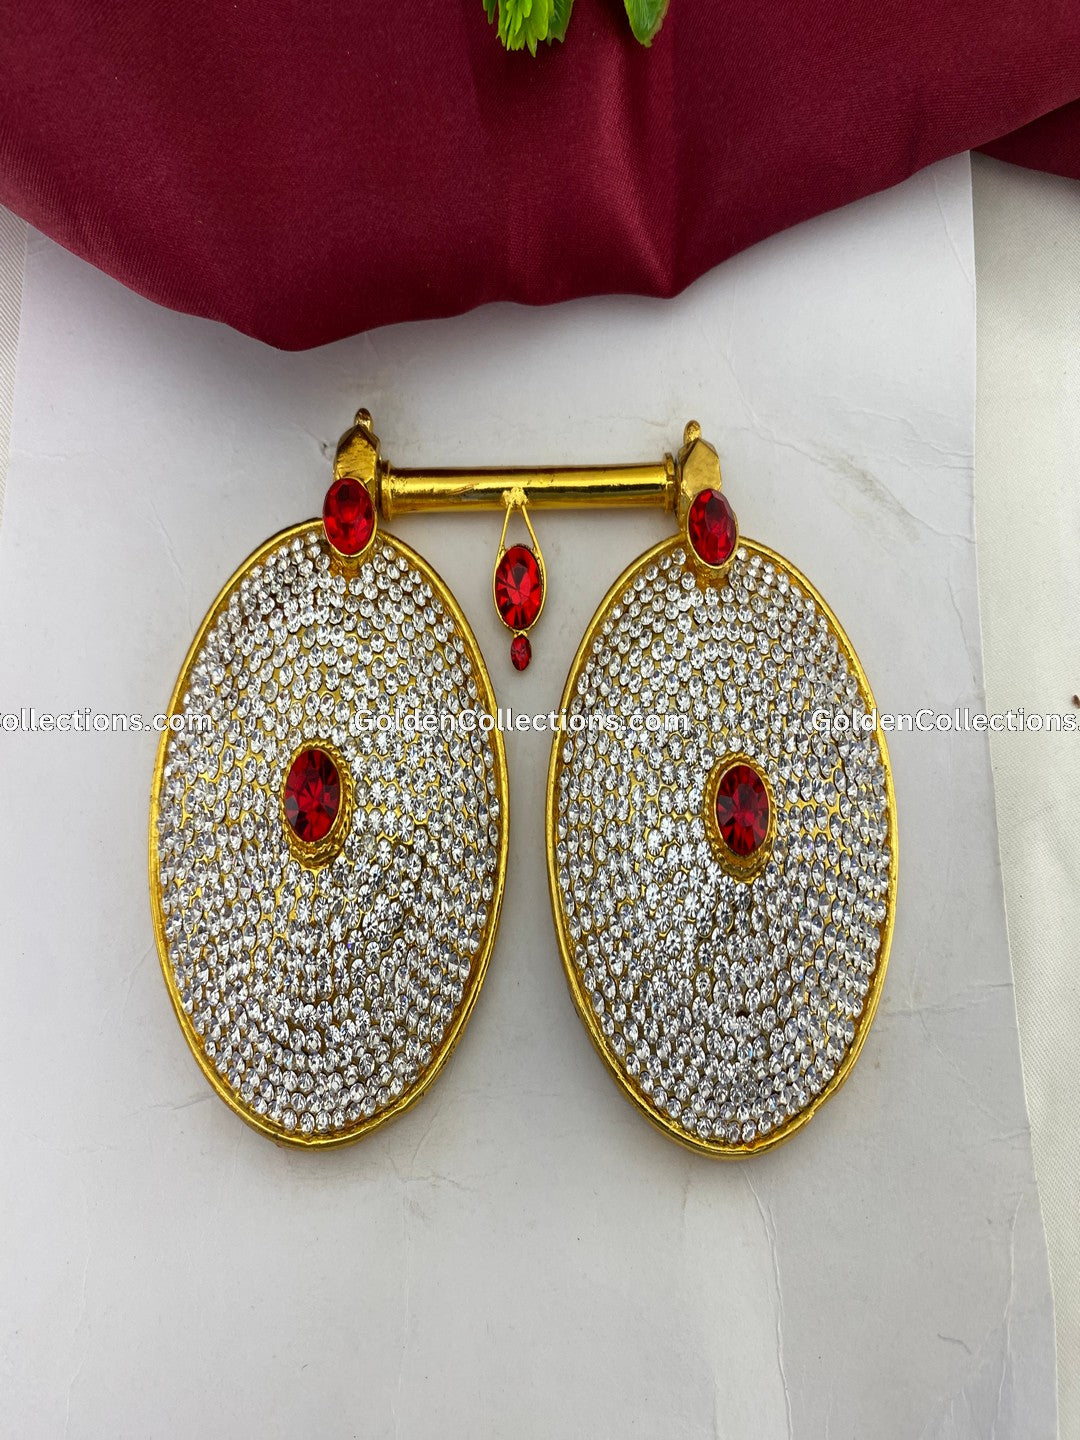 Pustal Chain for Deity God - Mangalsutra - GoldenCollections GPT-002